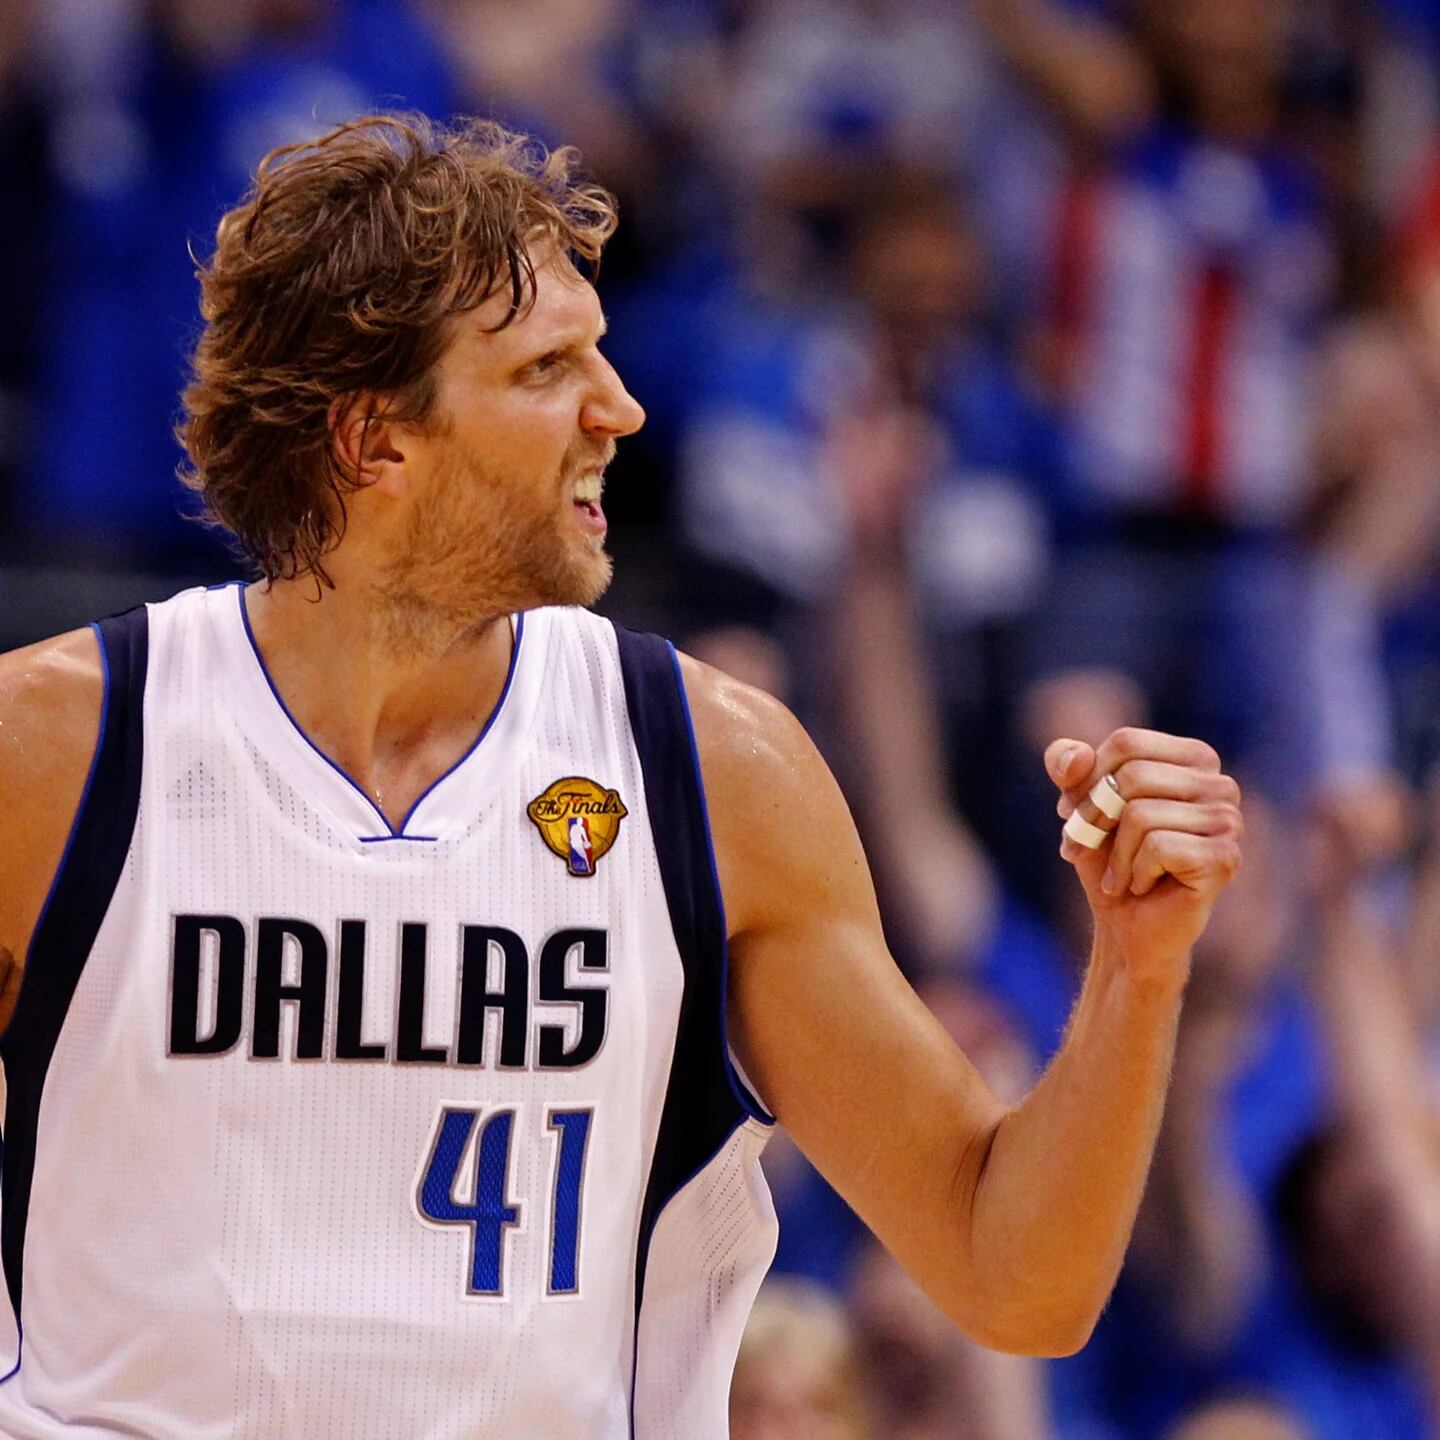 Forever 41′ NBA legend Dirk Nowitzki honored by his team - Infobae